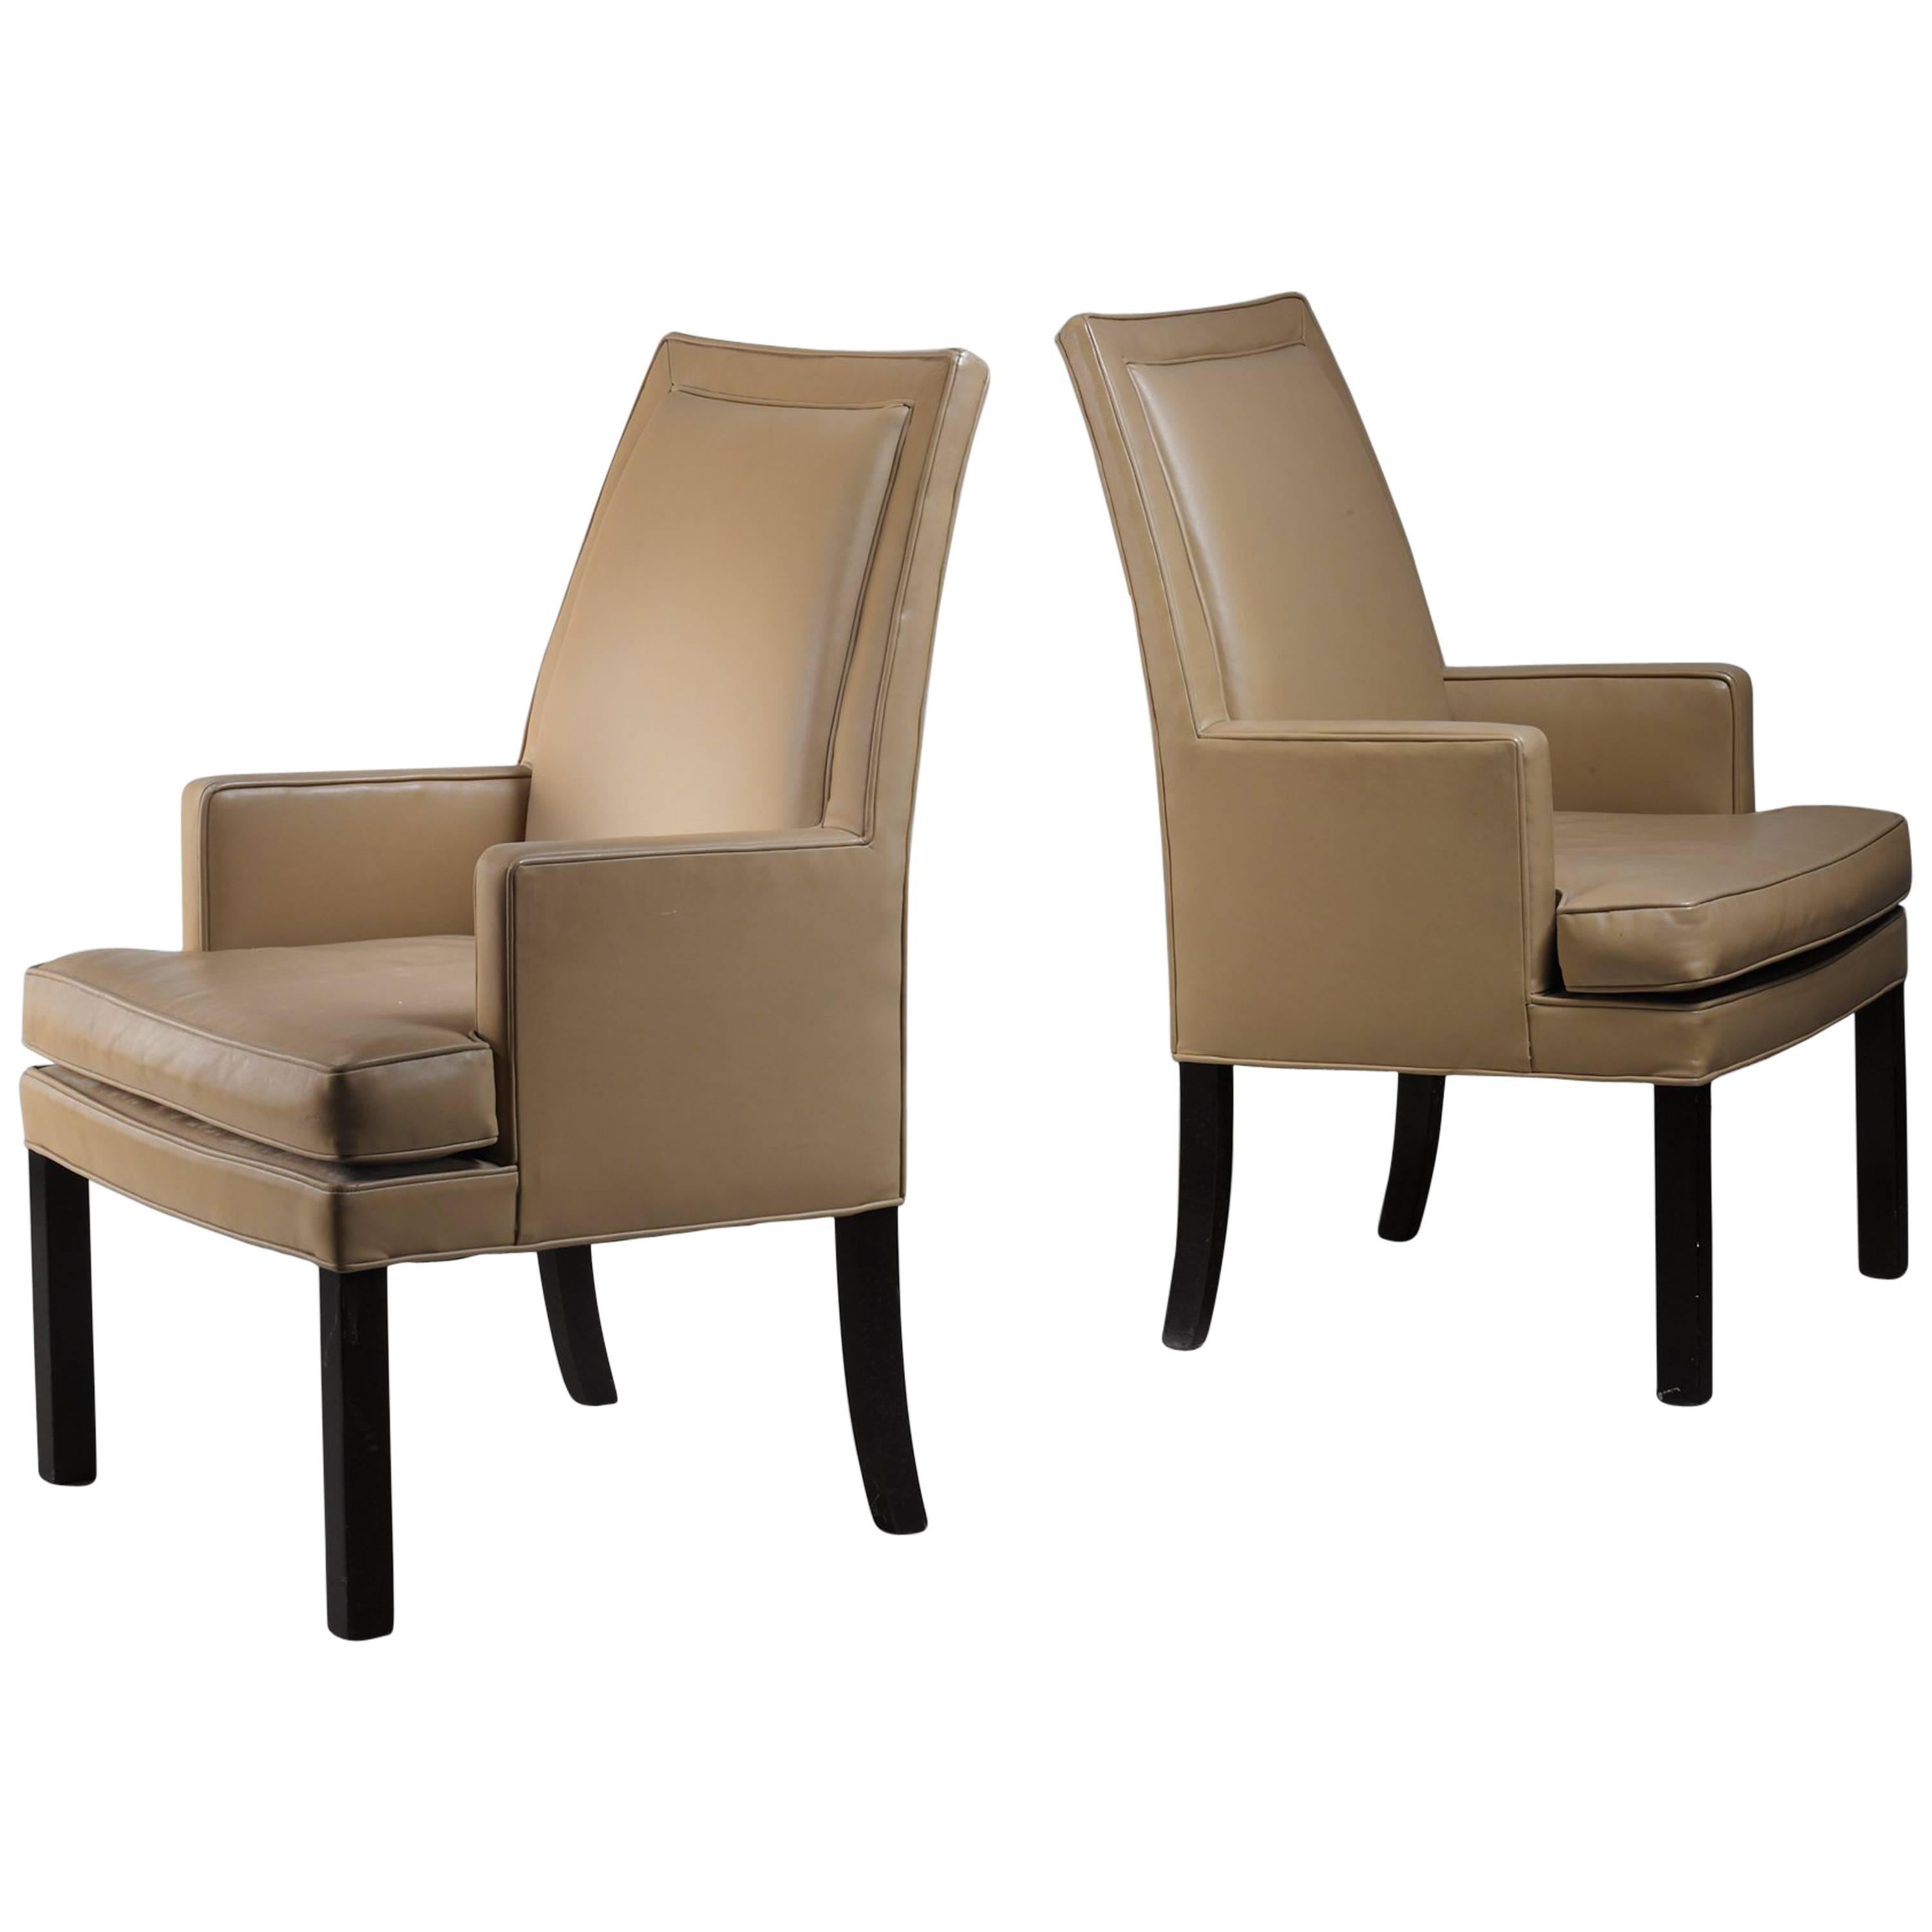 Roger Sprunger Pair of Dunbar Occasional Chairs, USA, 1960s